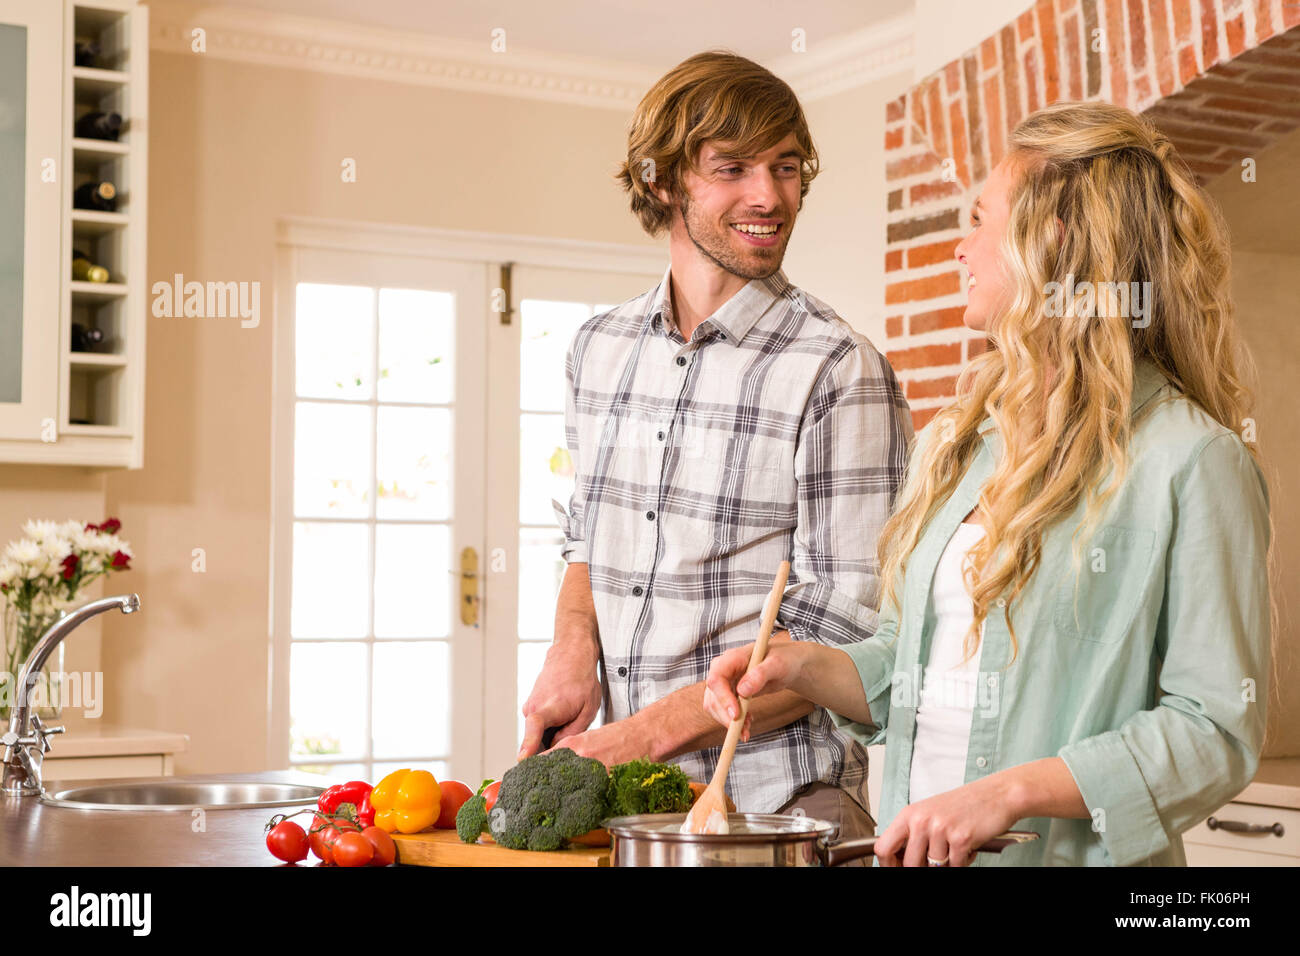 Cute couple cooking together Stock Photo